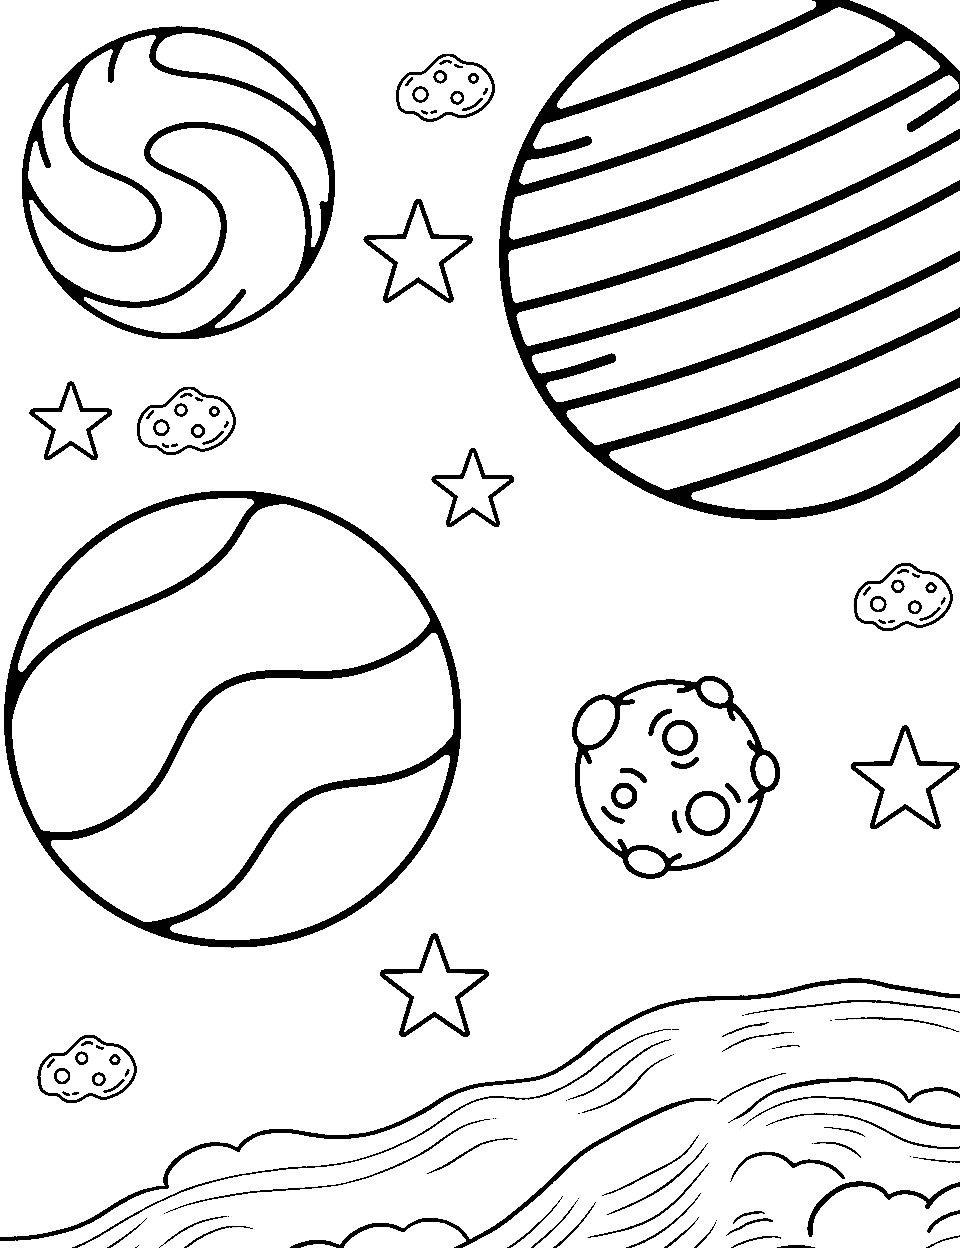 Night Sky Splendor Coloring Page - A sky filled with twinkling stars and planets.